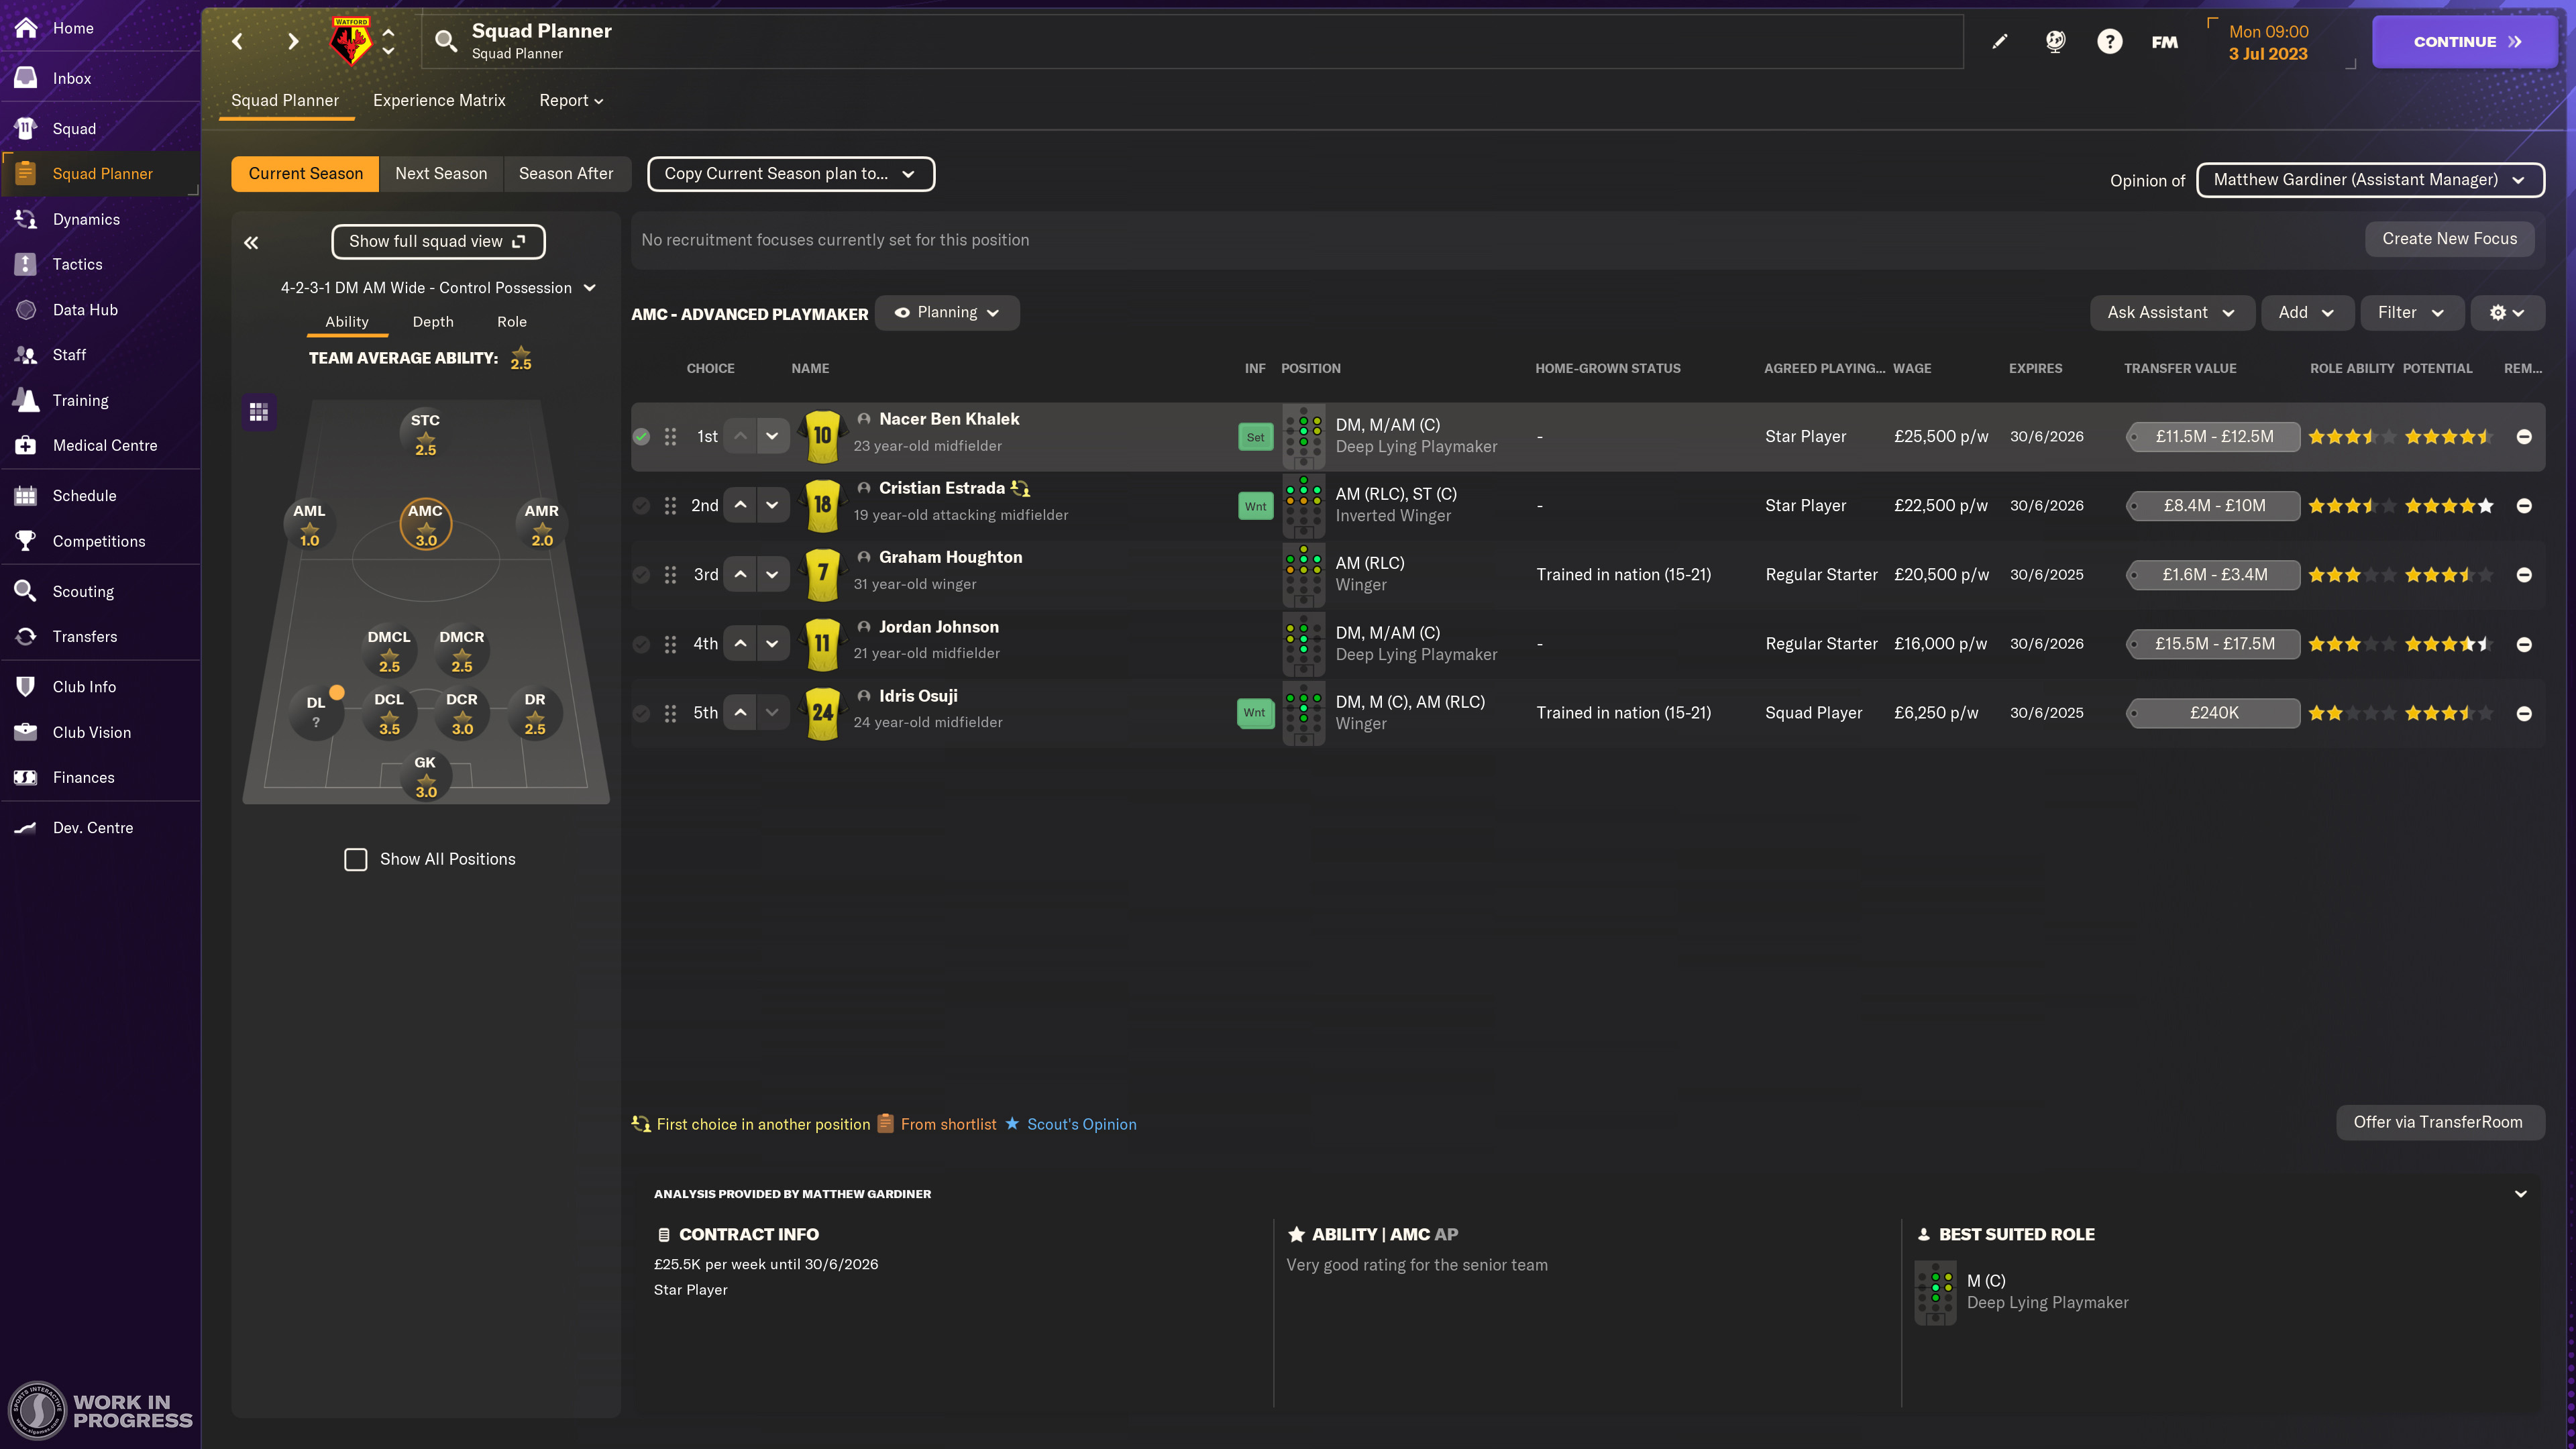 Watford_%20Squad%20Planner%20player%20selected